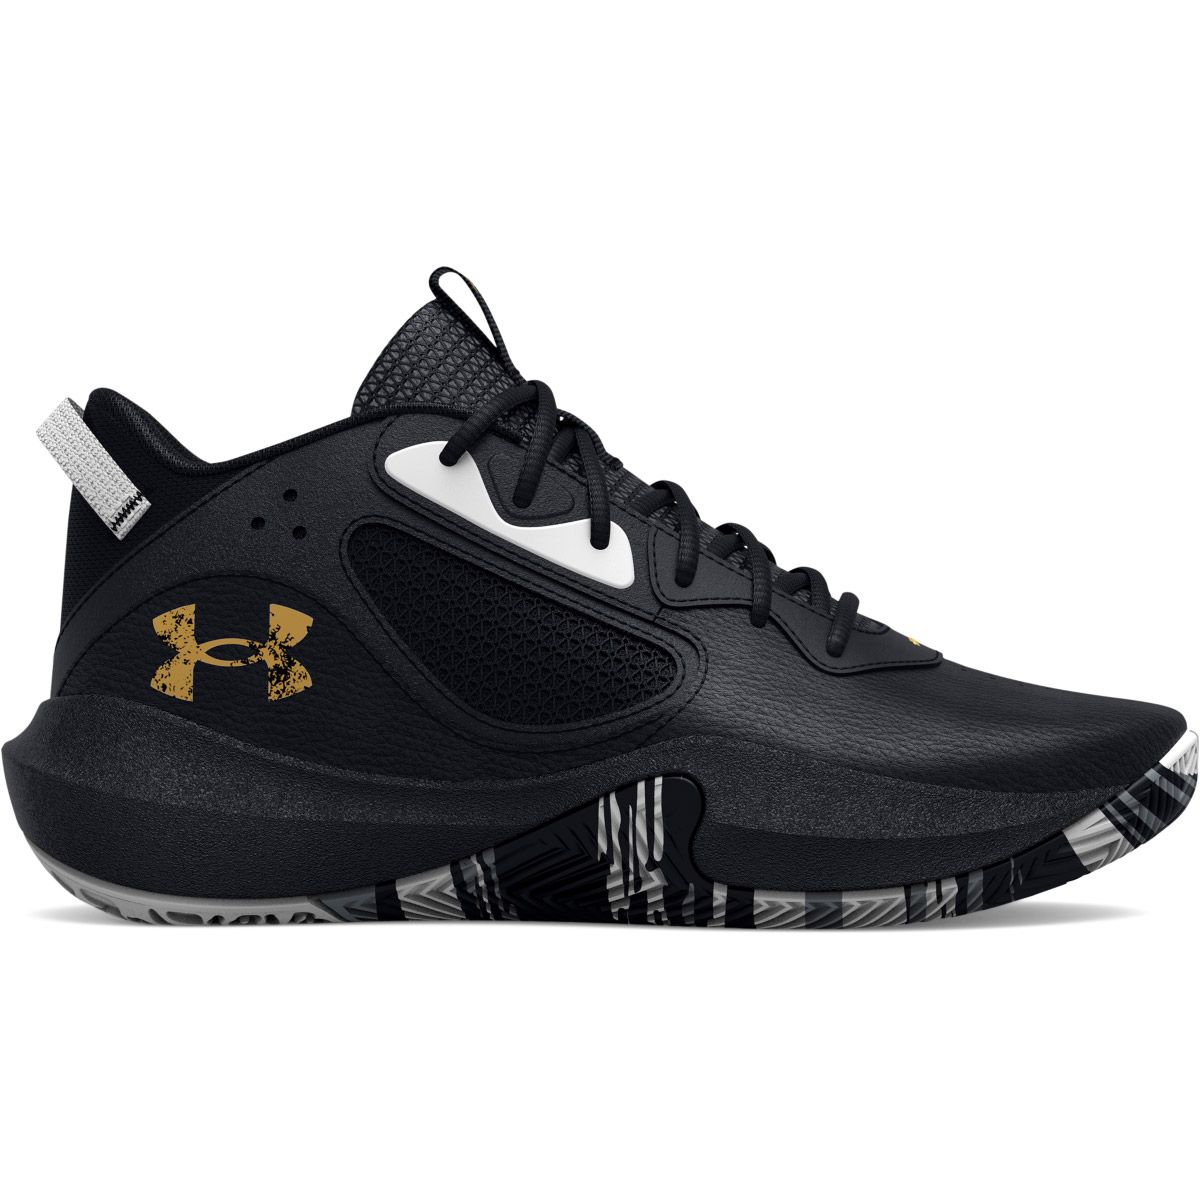 Under Armour Lockdown 6 Junior Basketball Shoes (GS) 3025617